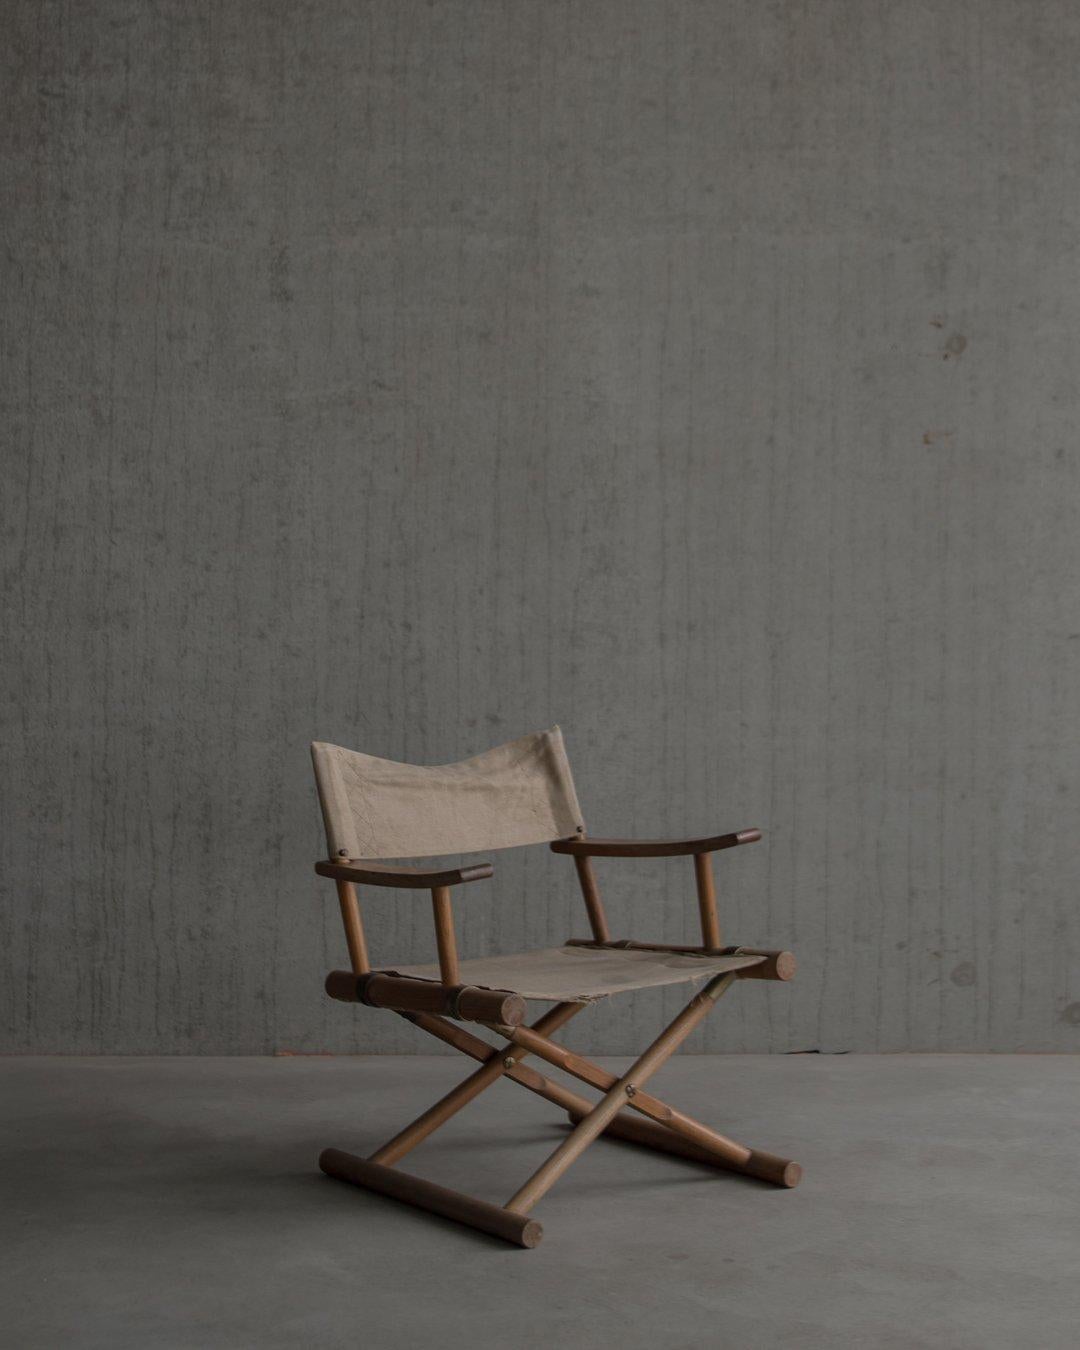 Rare safari-style folding chair, model “Sune” designed by Sune Lindström and produced by Nordiska Kompaniet in Sweden. Made in the early 1960s (designed in 1962) from solid Oak wood with brass hardware and original linen upholstery. Nice details